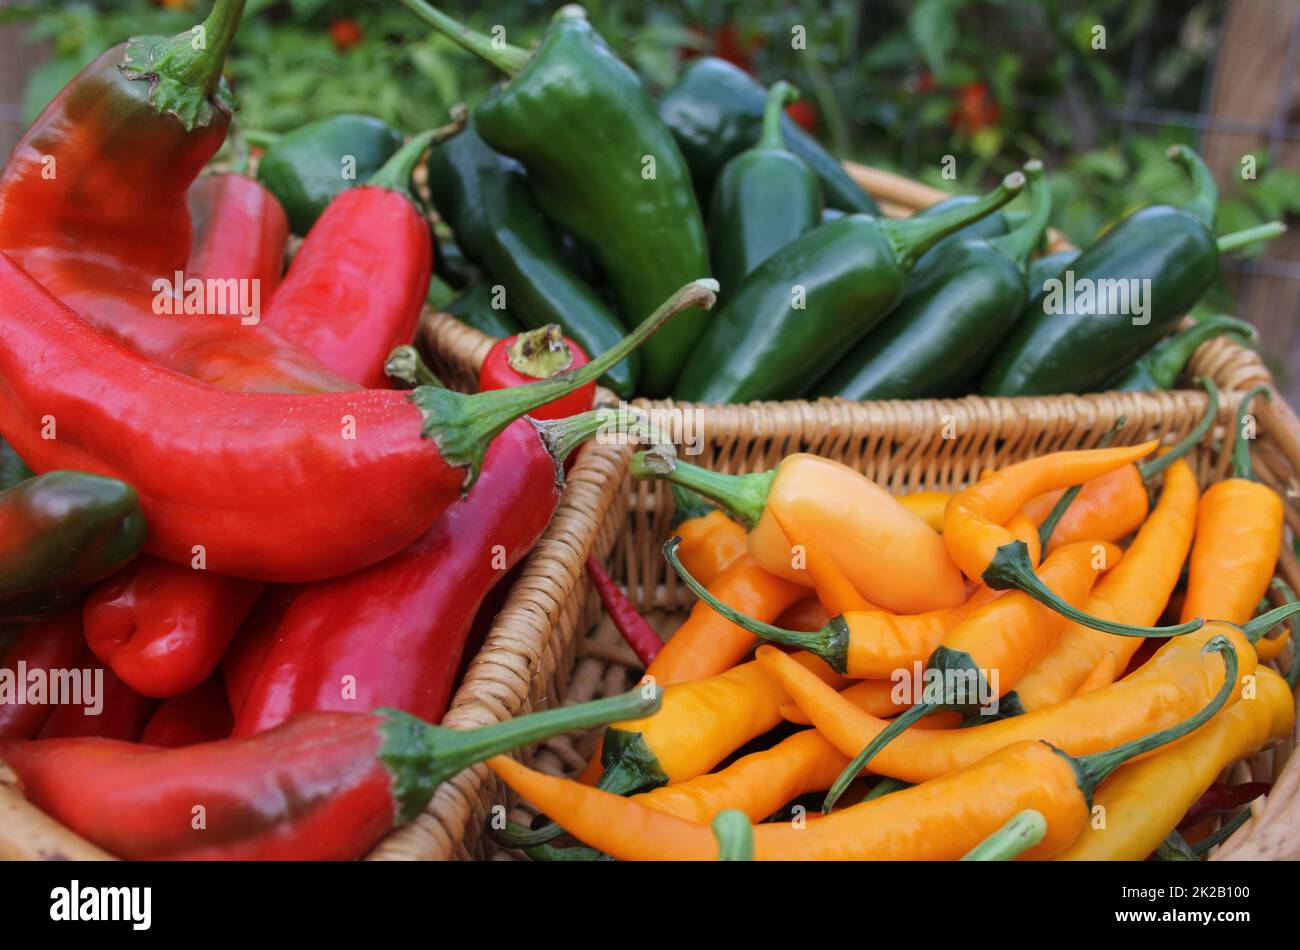 Poblano Peppers with Asian Red Peppers and Yellow Chili Peppers Stock Photo